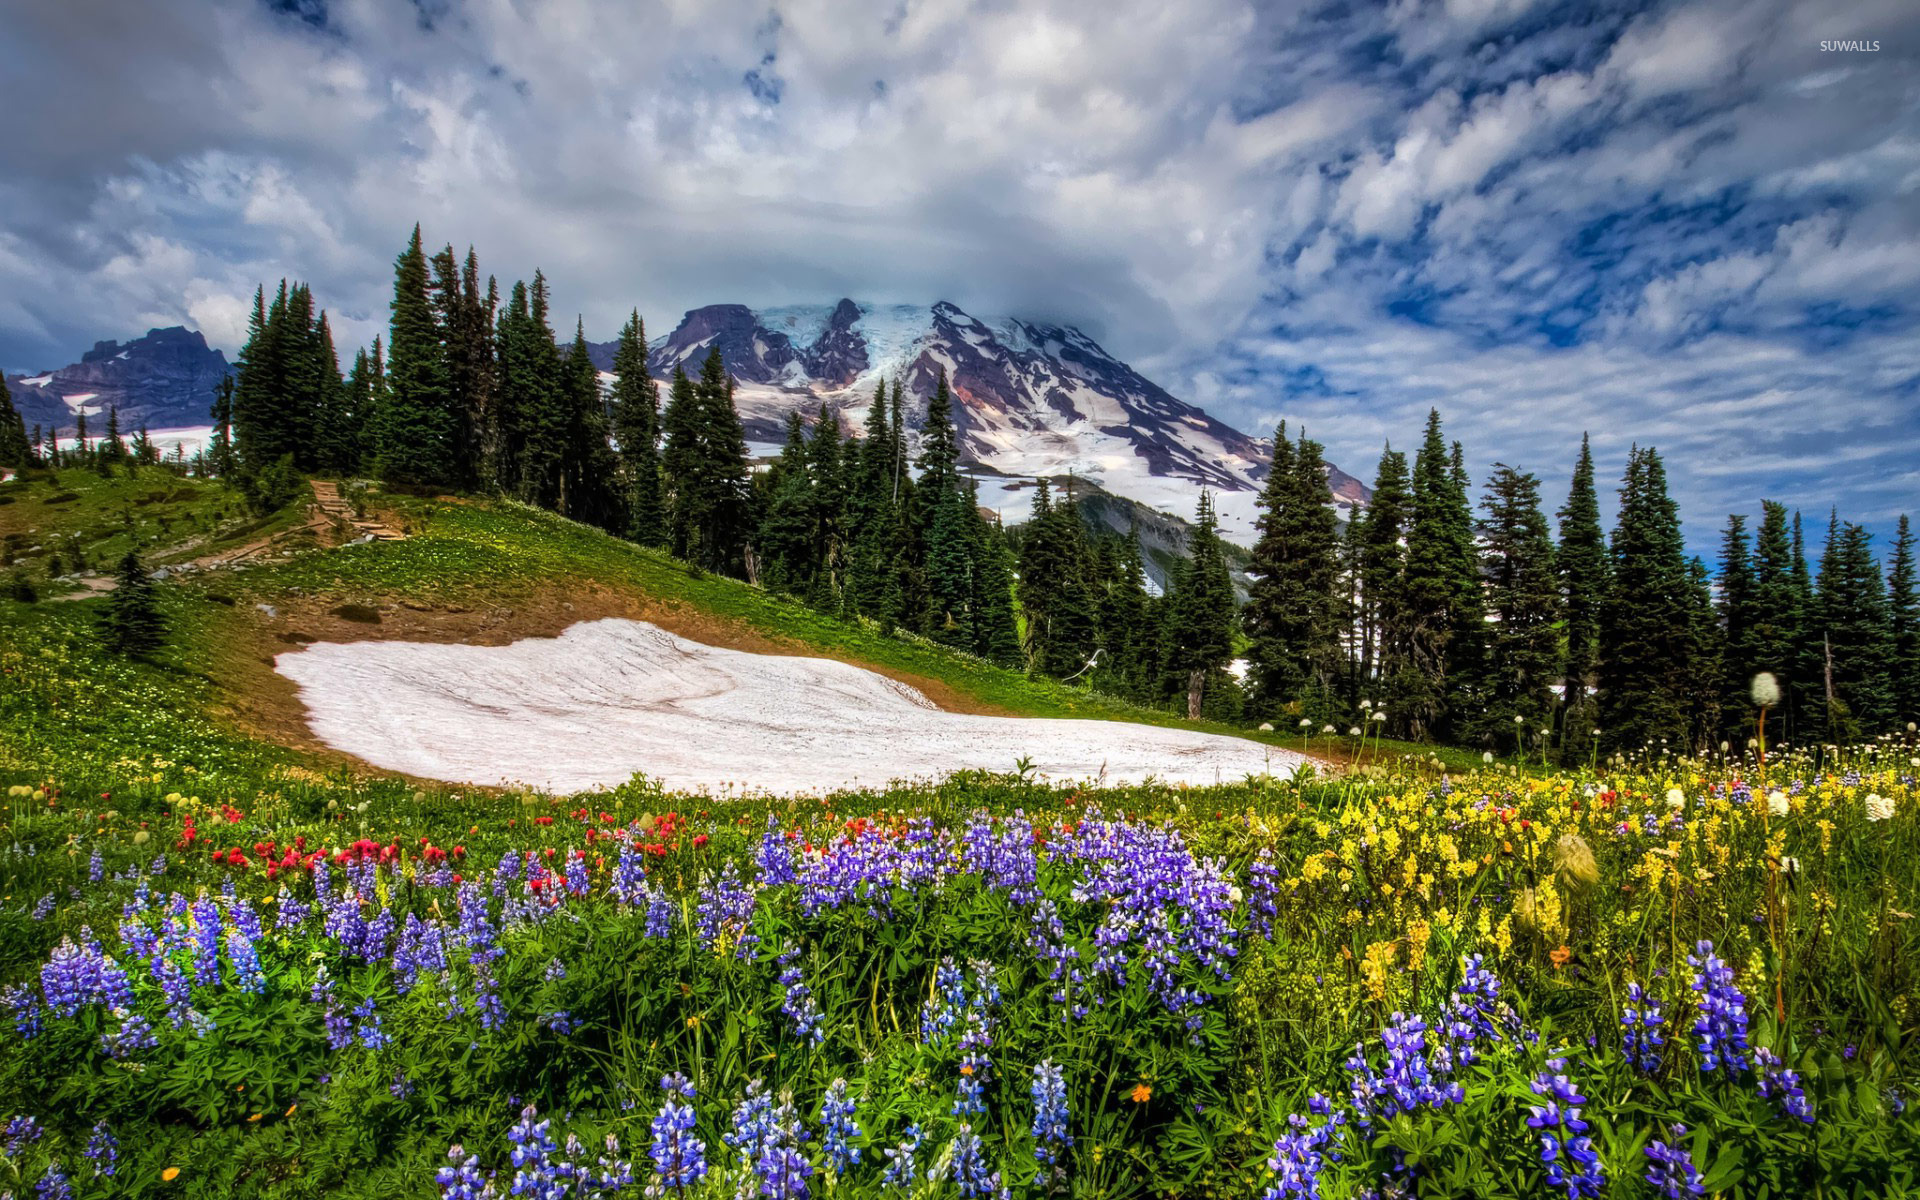 Wildflowers in the meadow wallpaper - Nature wallpapers - #19570